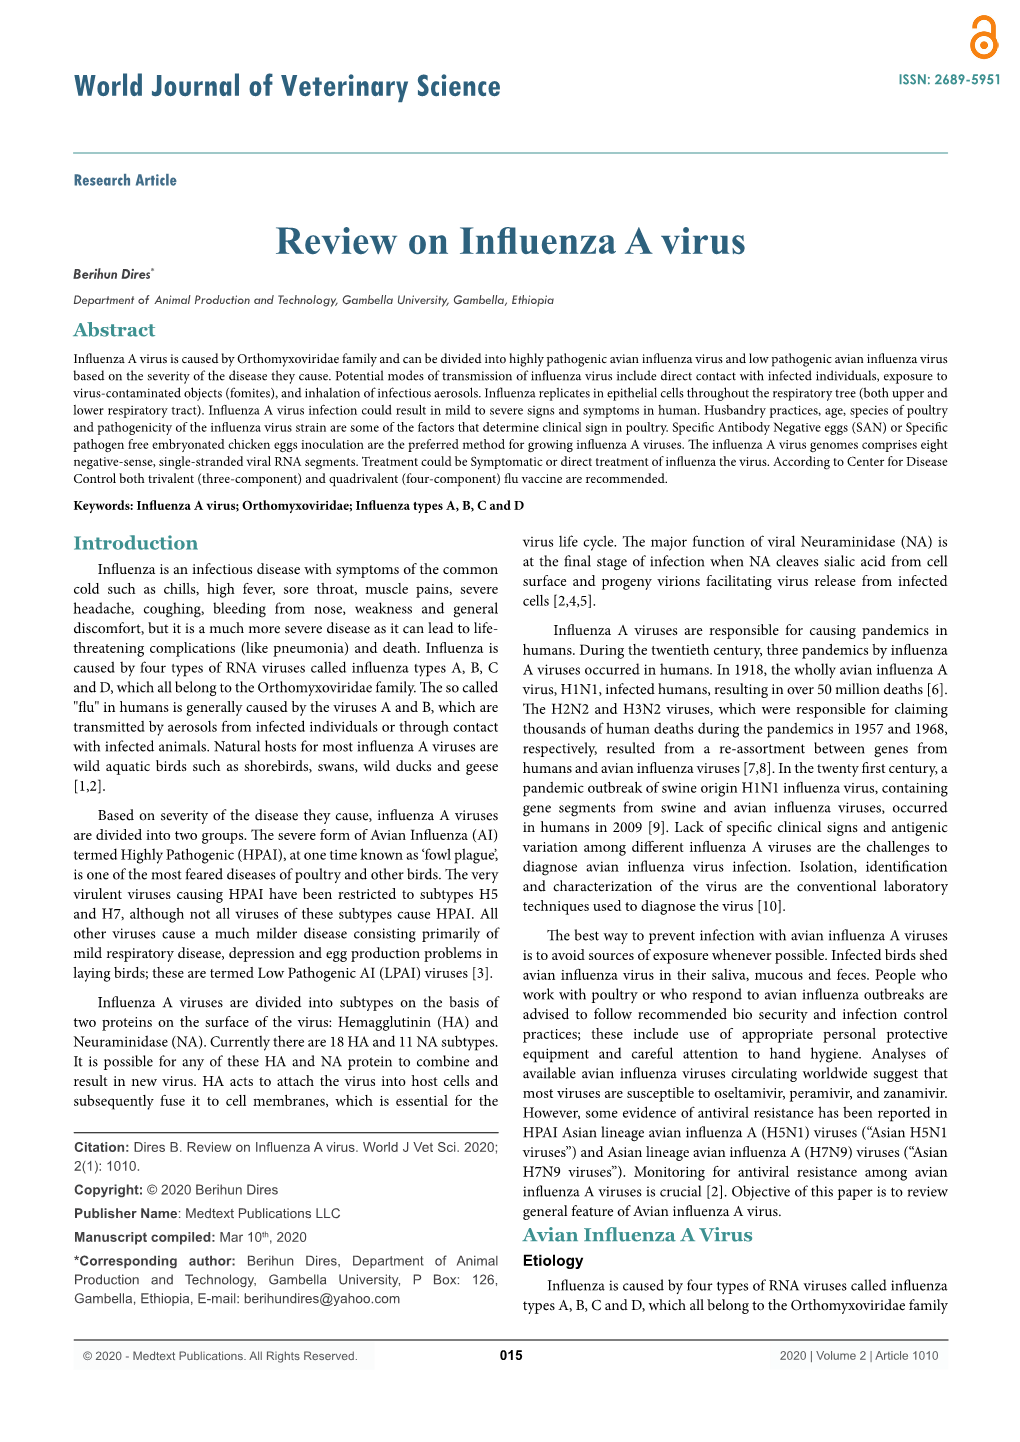 Review on Influenza a Virus